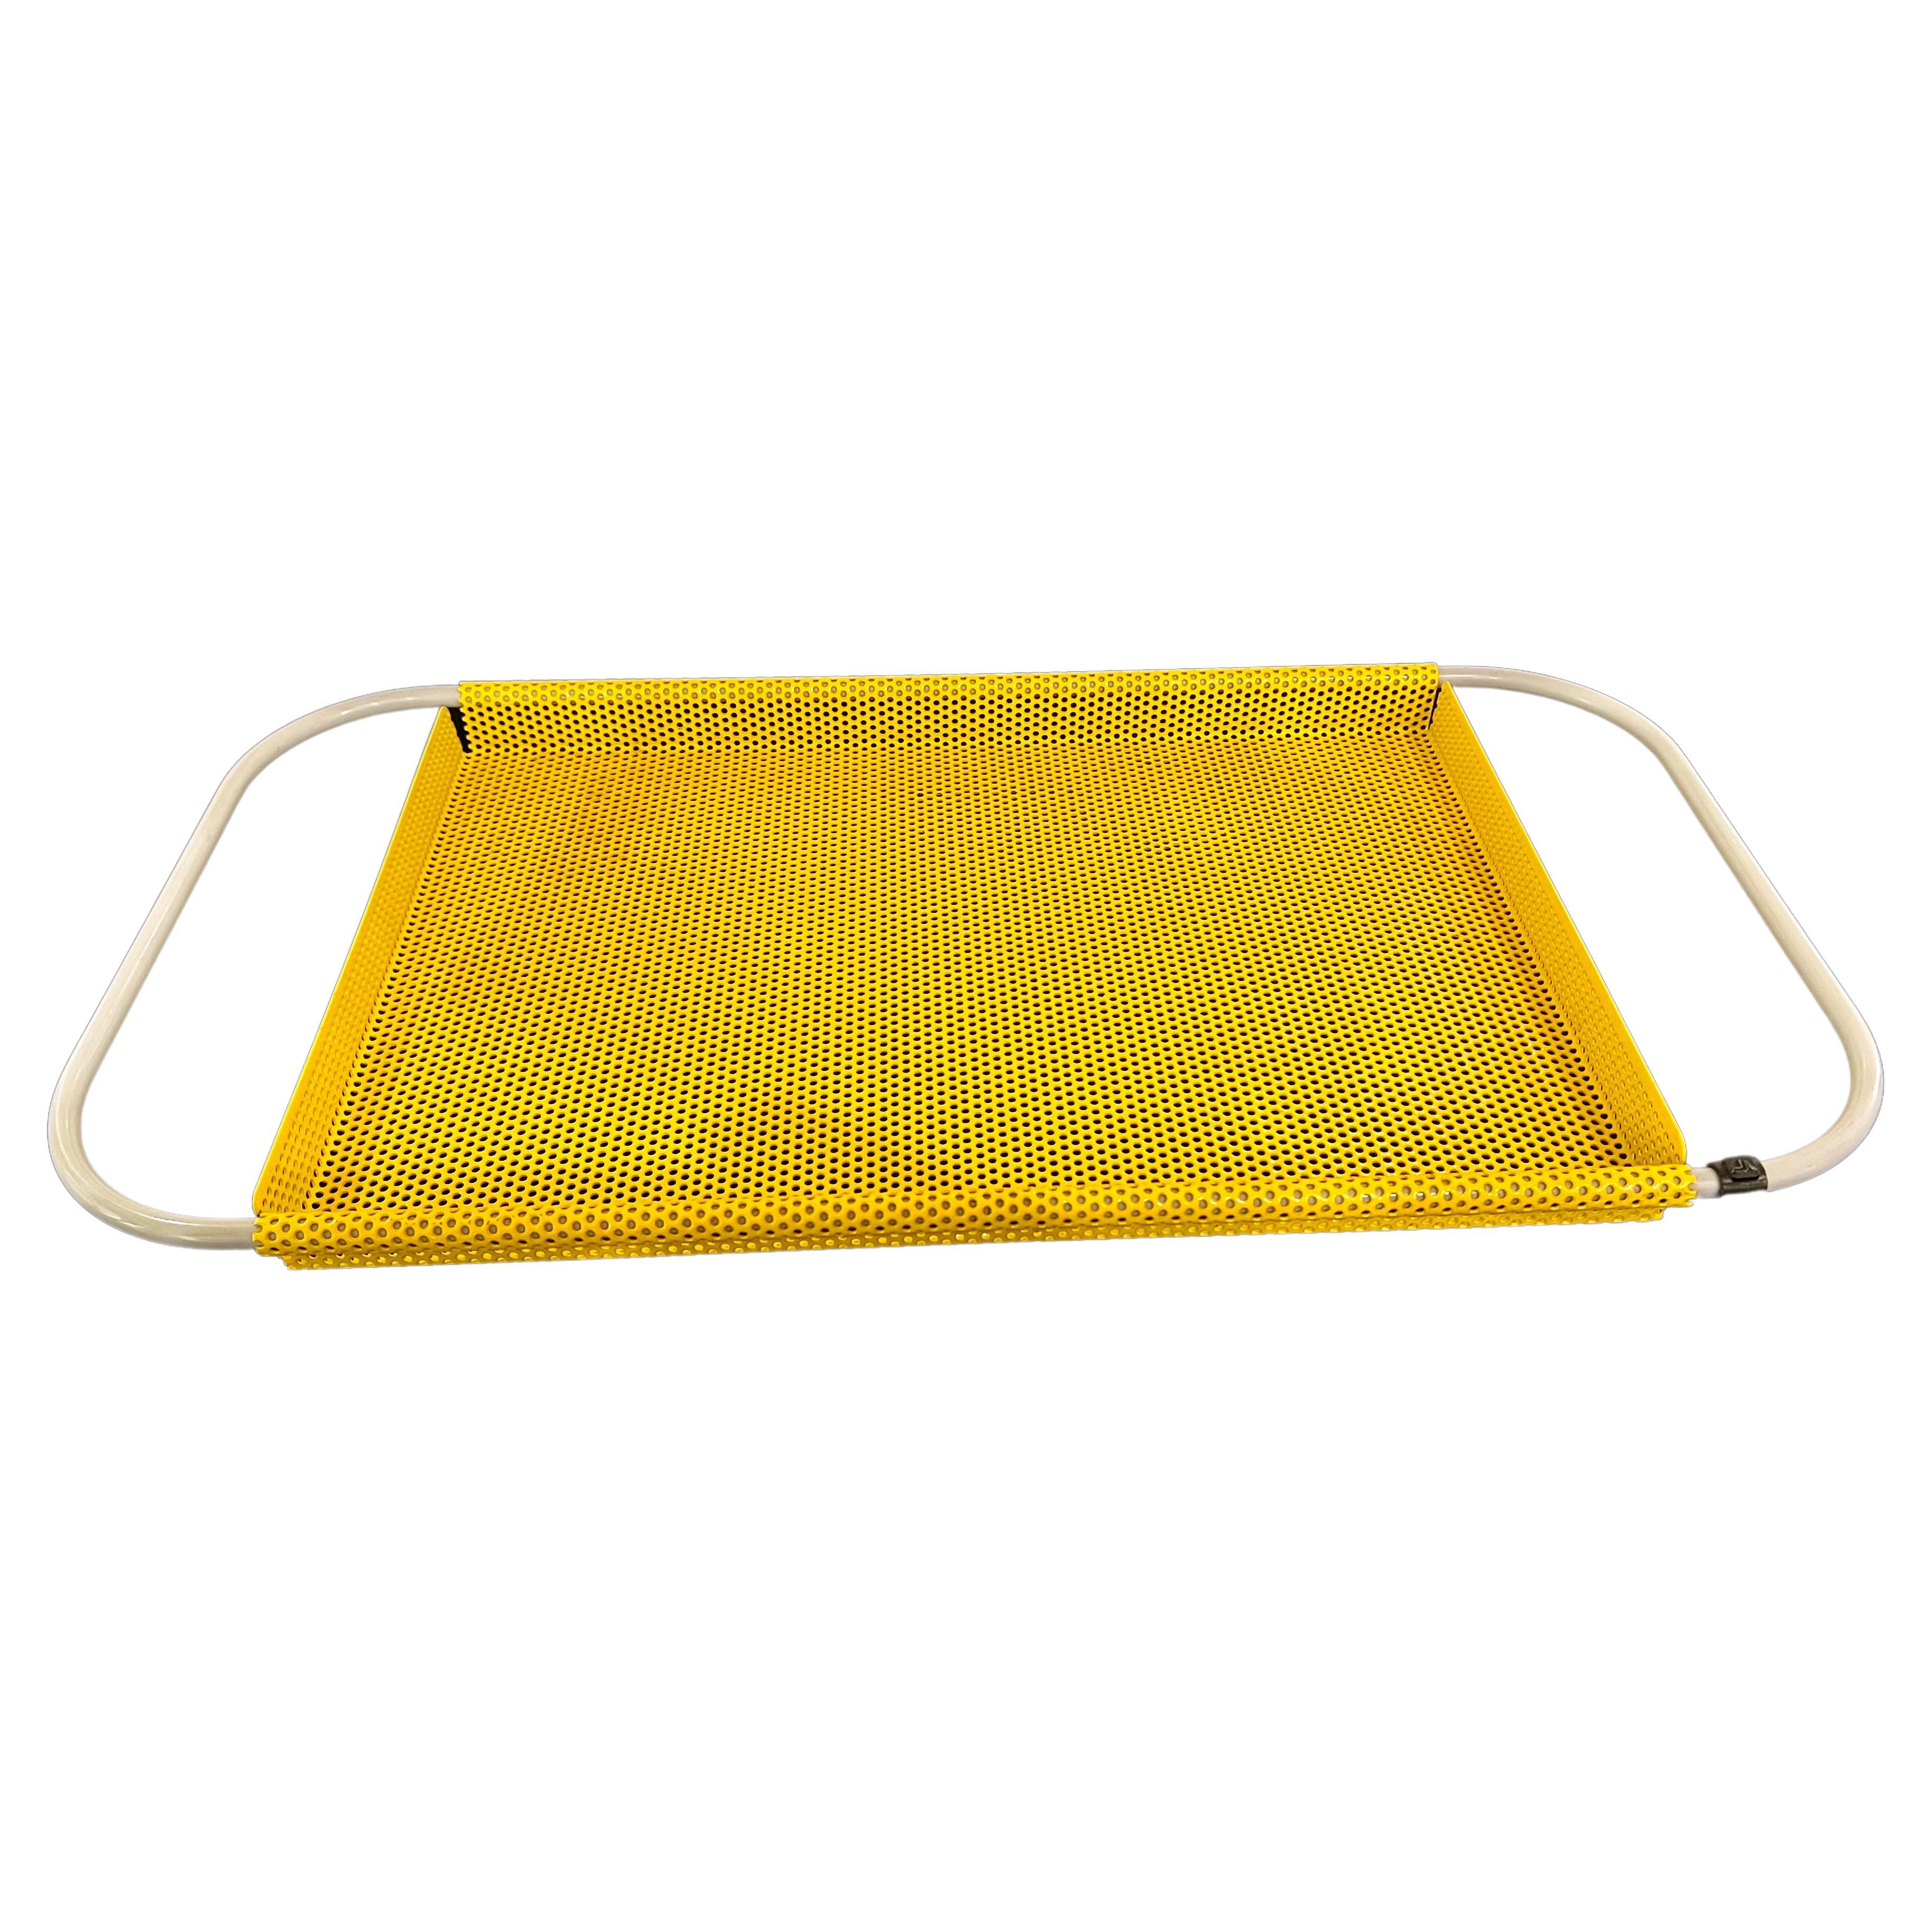 Post-Modern Postmodern Italian 1980's Perforated Metal Tray For Sale